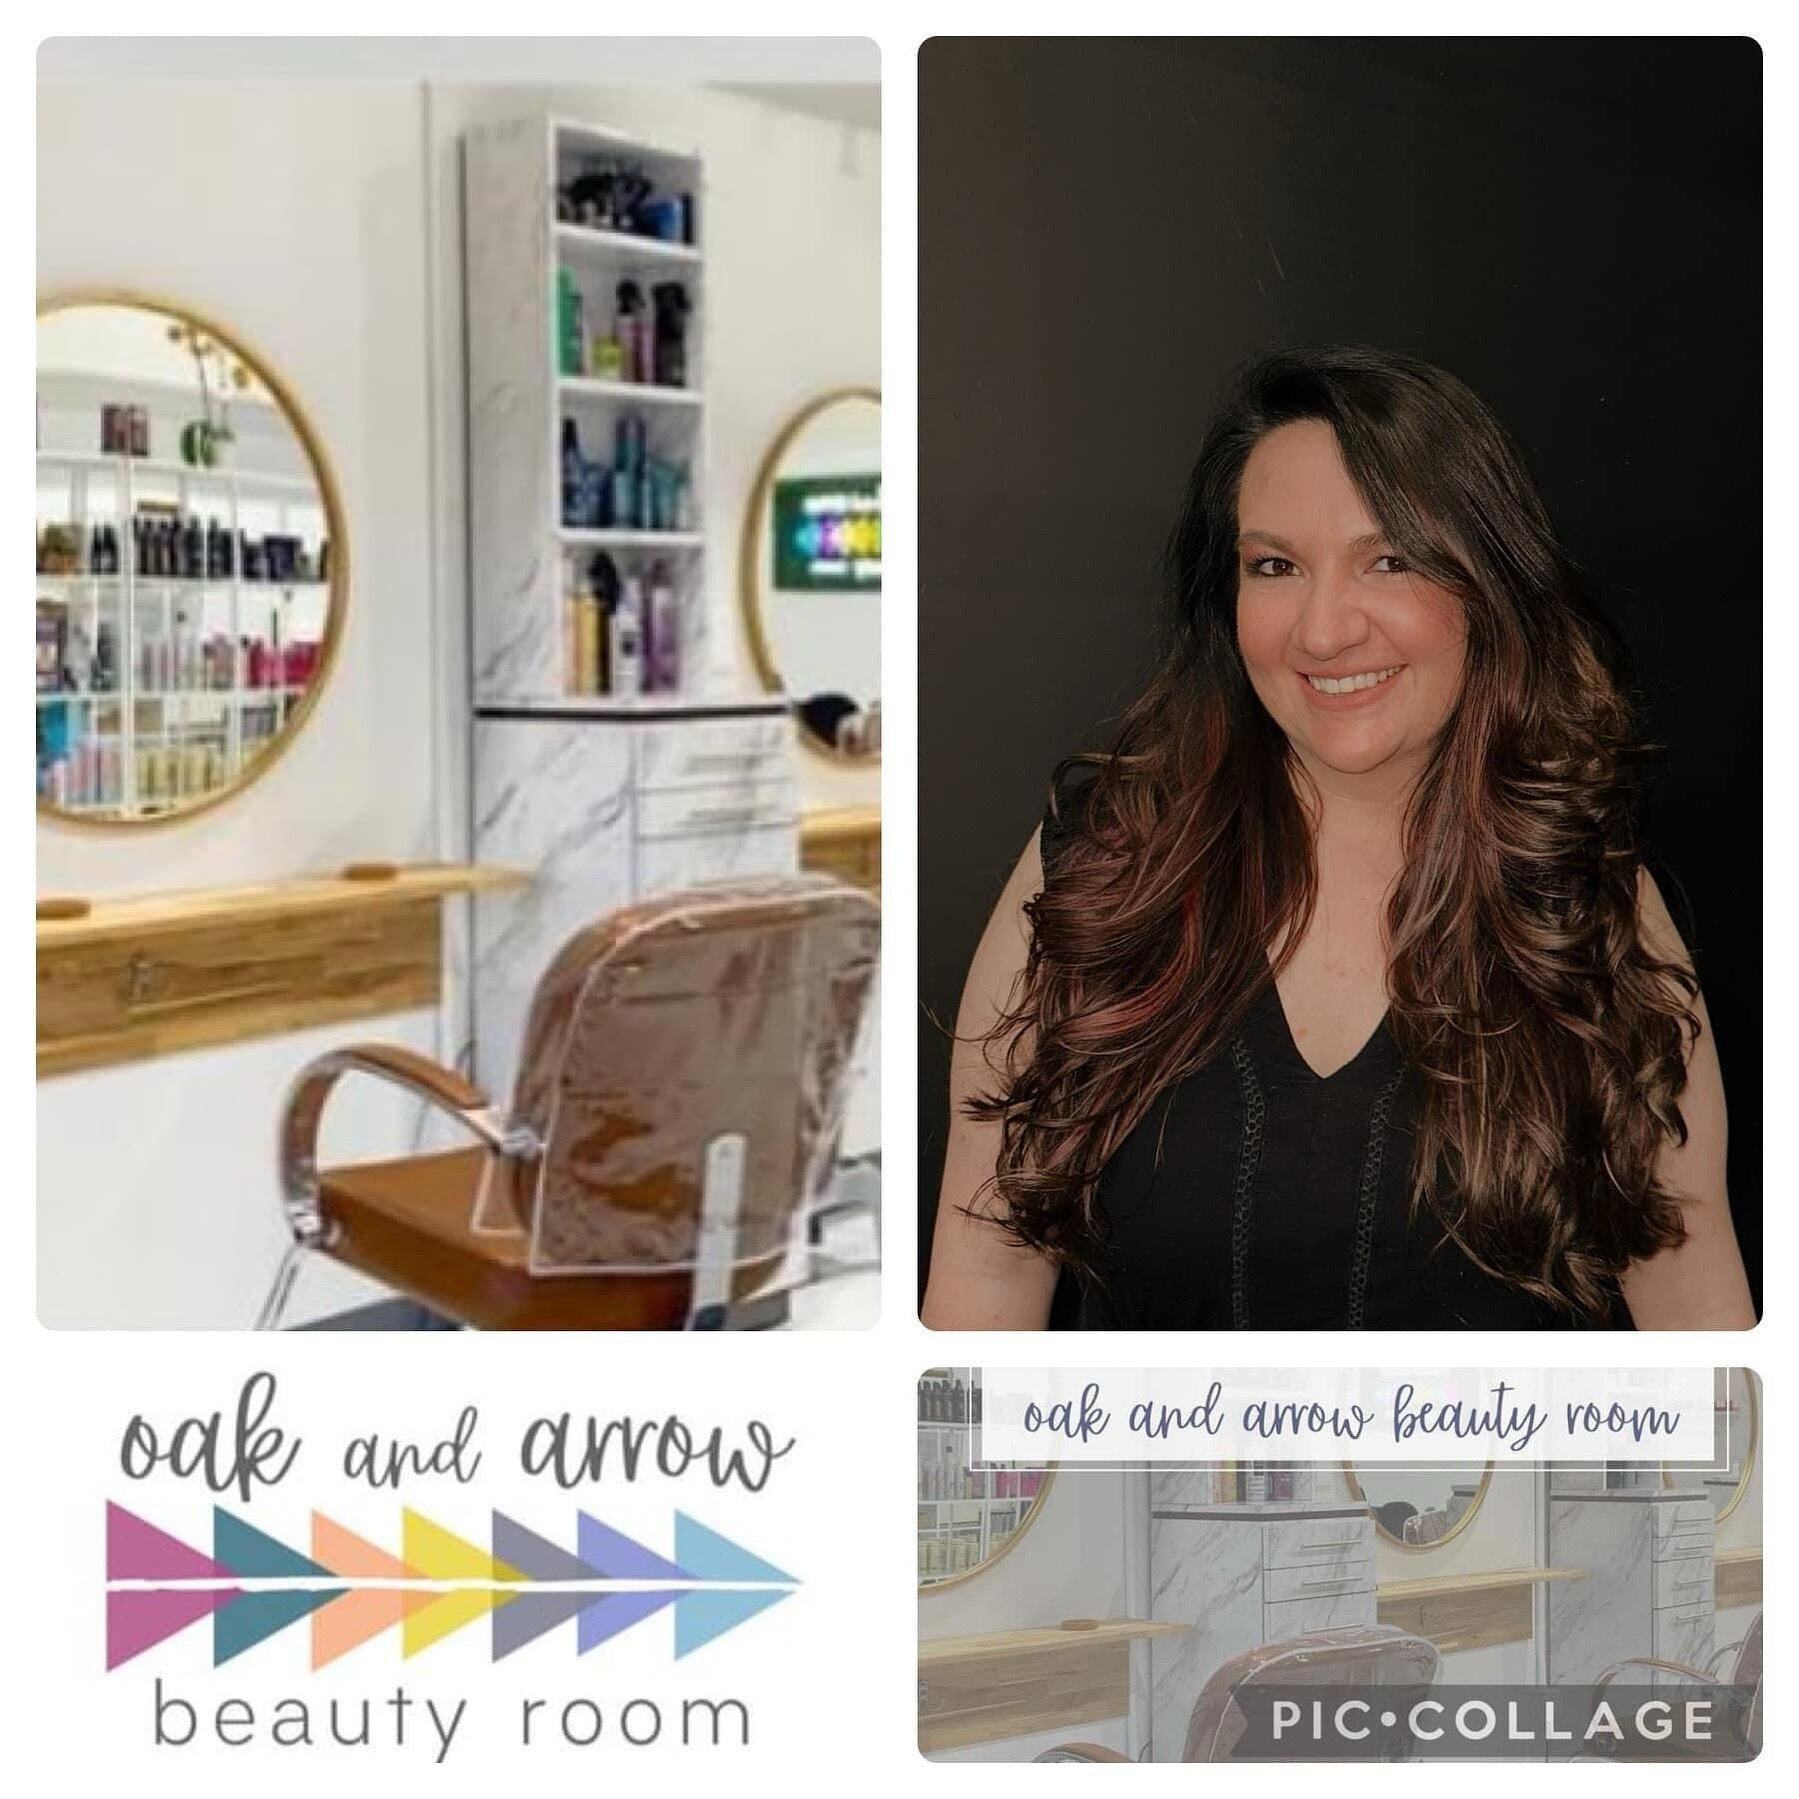 Welcome our newest talent in Troy! 

Courtney Wertz has been an experienced hair designer for the last 12 years. She specializes in color, foiling, vivid colors, haircuts, kids cuts,&nbsp;manicures, and pedicures. When she&rsquo;s not behind the chai